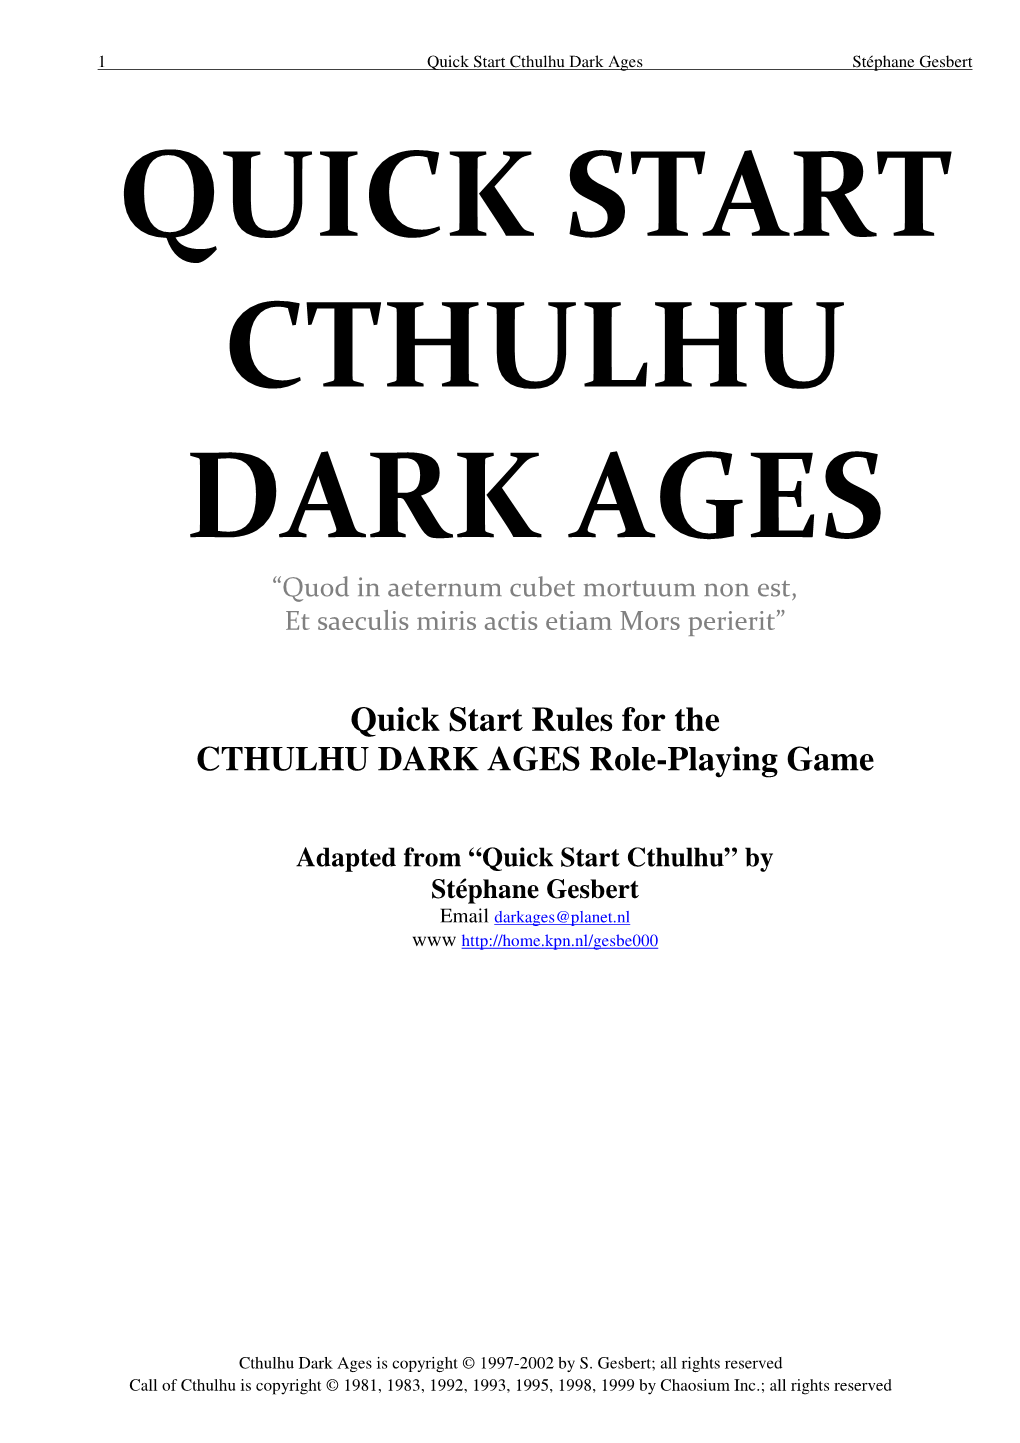 Quick Start Rules for the CTHULHU DARK AGES Role-Playing Game